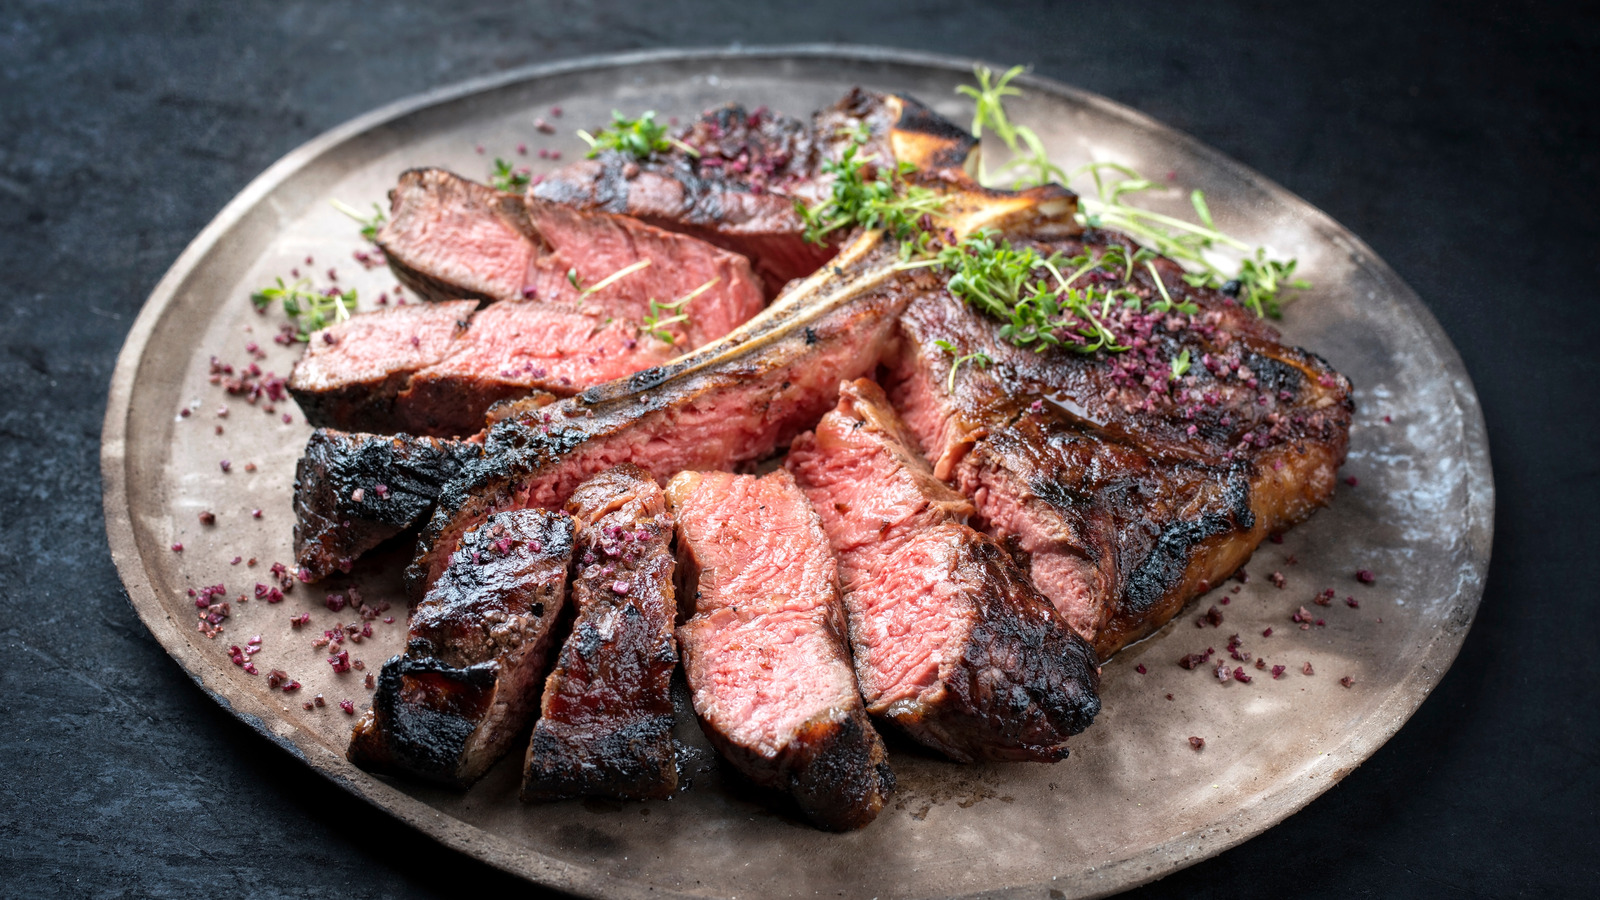 How To Avoid ‘Torch Taste’ When Blowtorching Your Steak